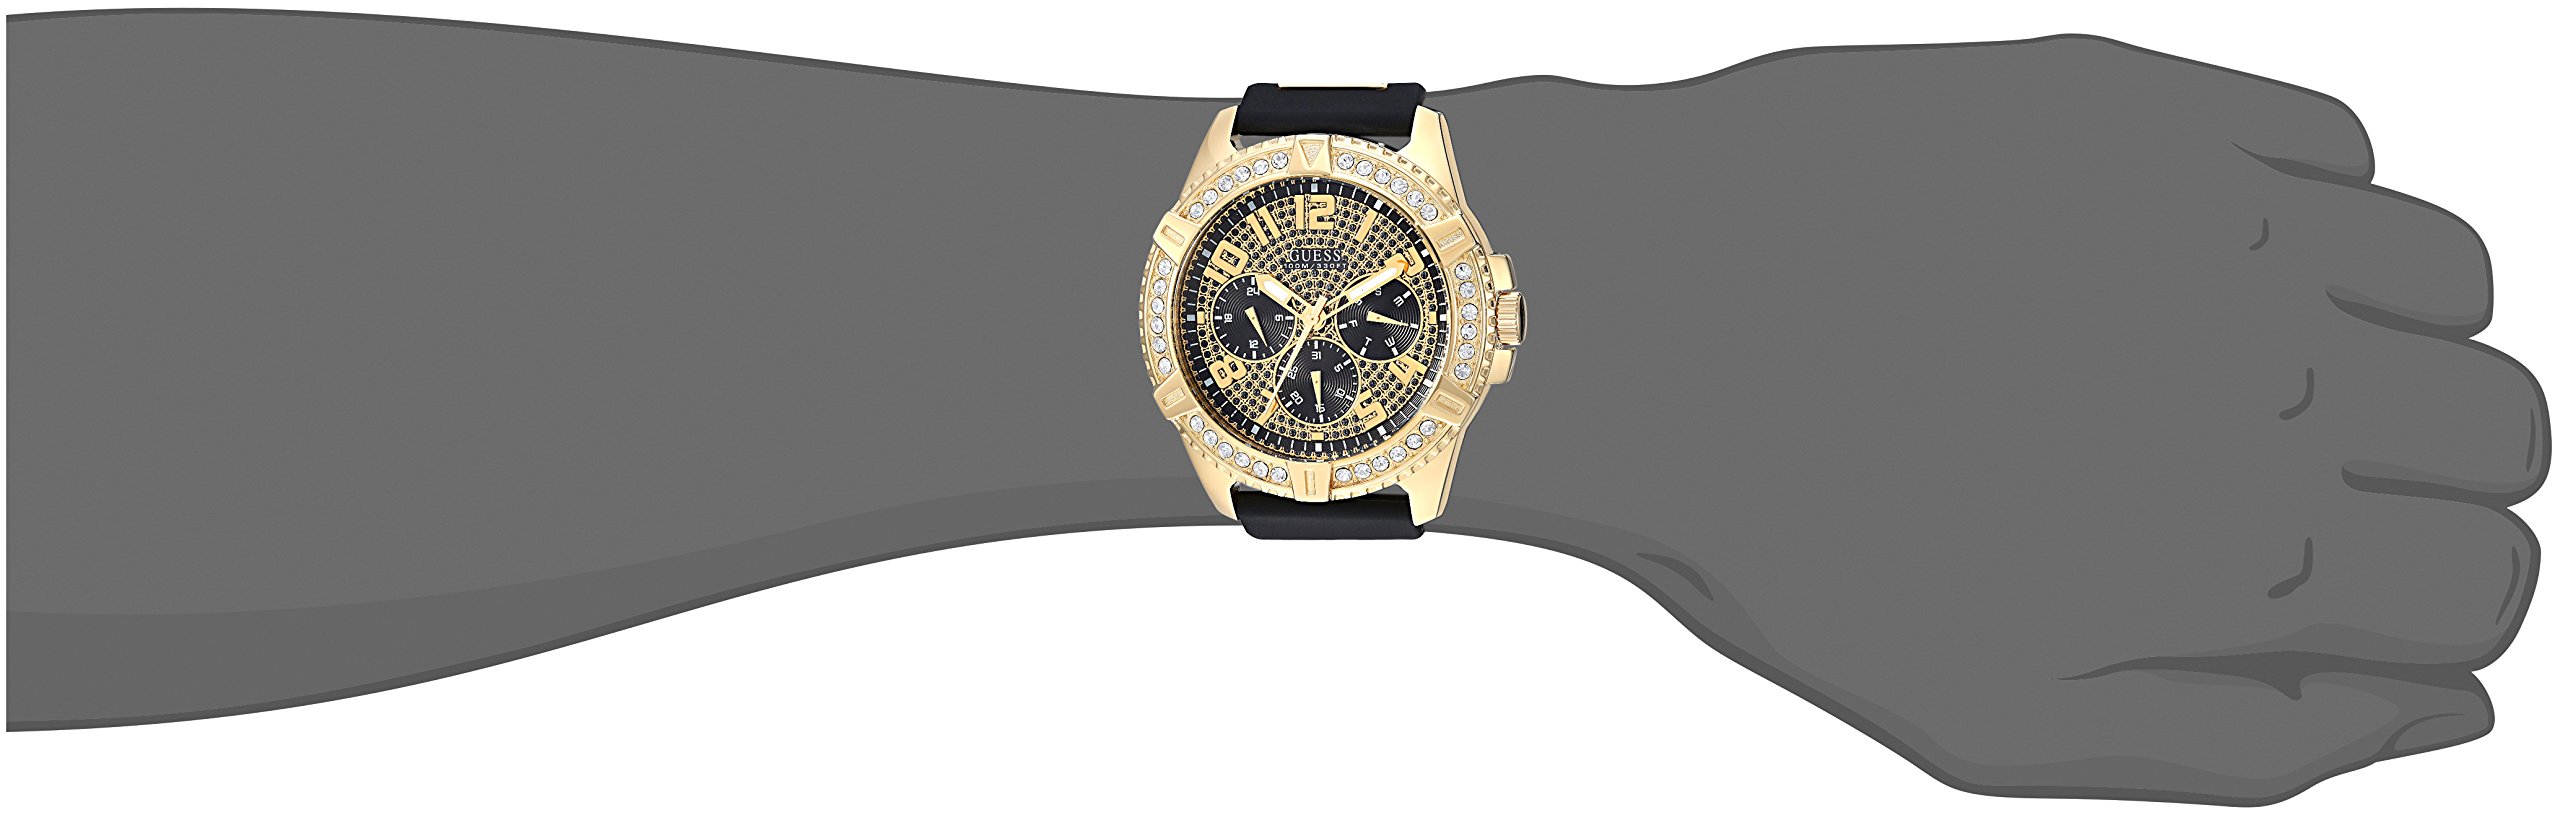 GUESS Stainless Steel Crystal Embellished Bracelet Watch with Day, Date + 24 Hour Military/Int'l Time